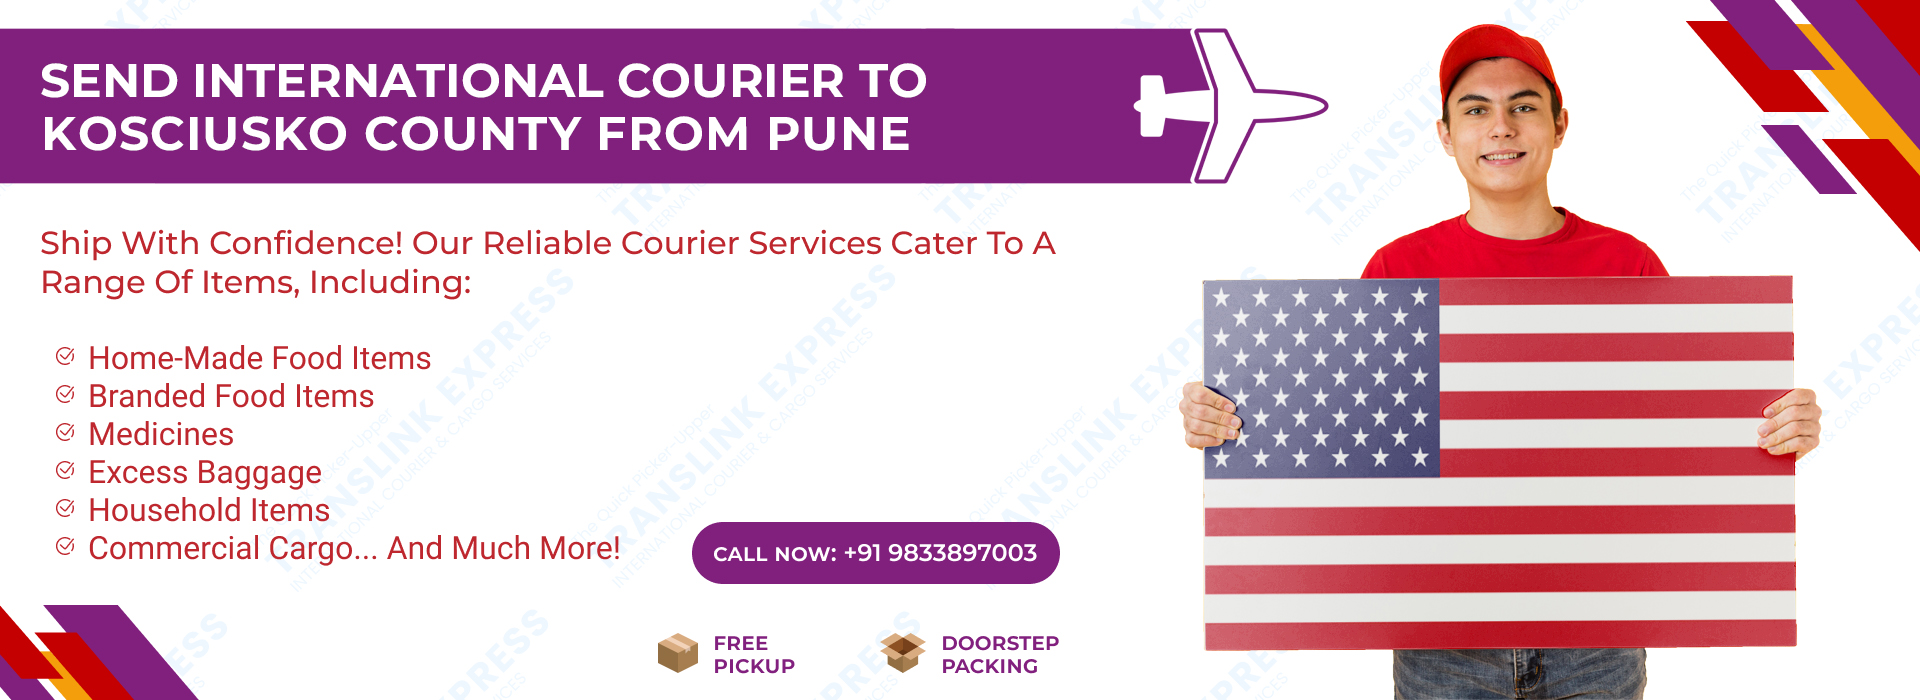 Courier to Kosciusko County From Pune